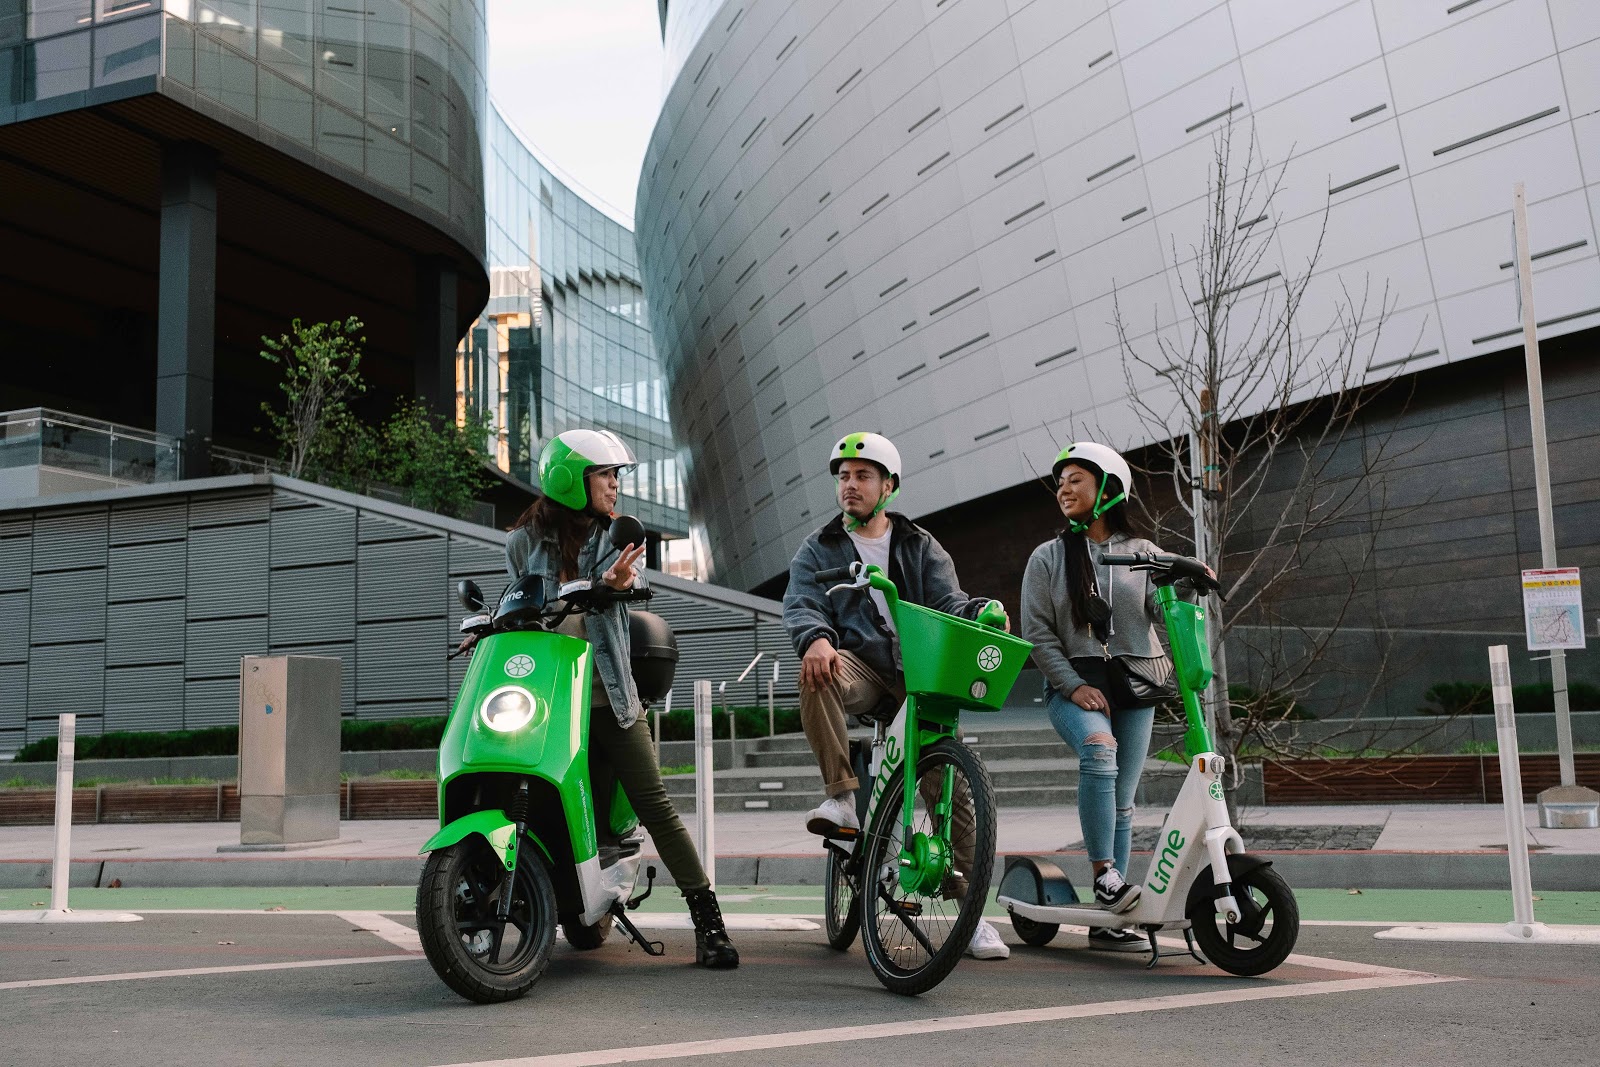 Introducing the Lime E-moped